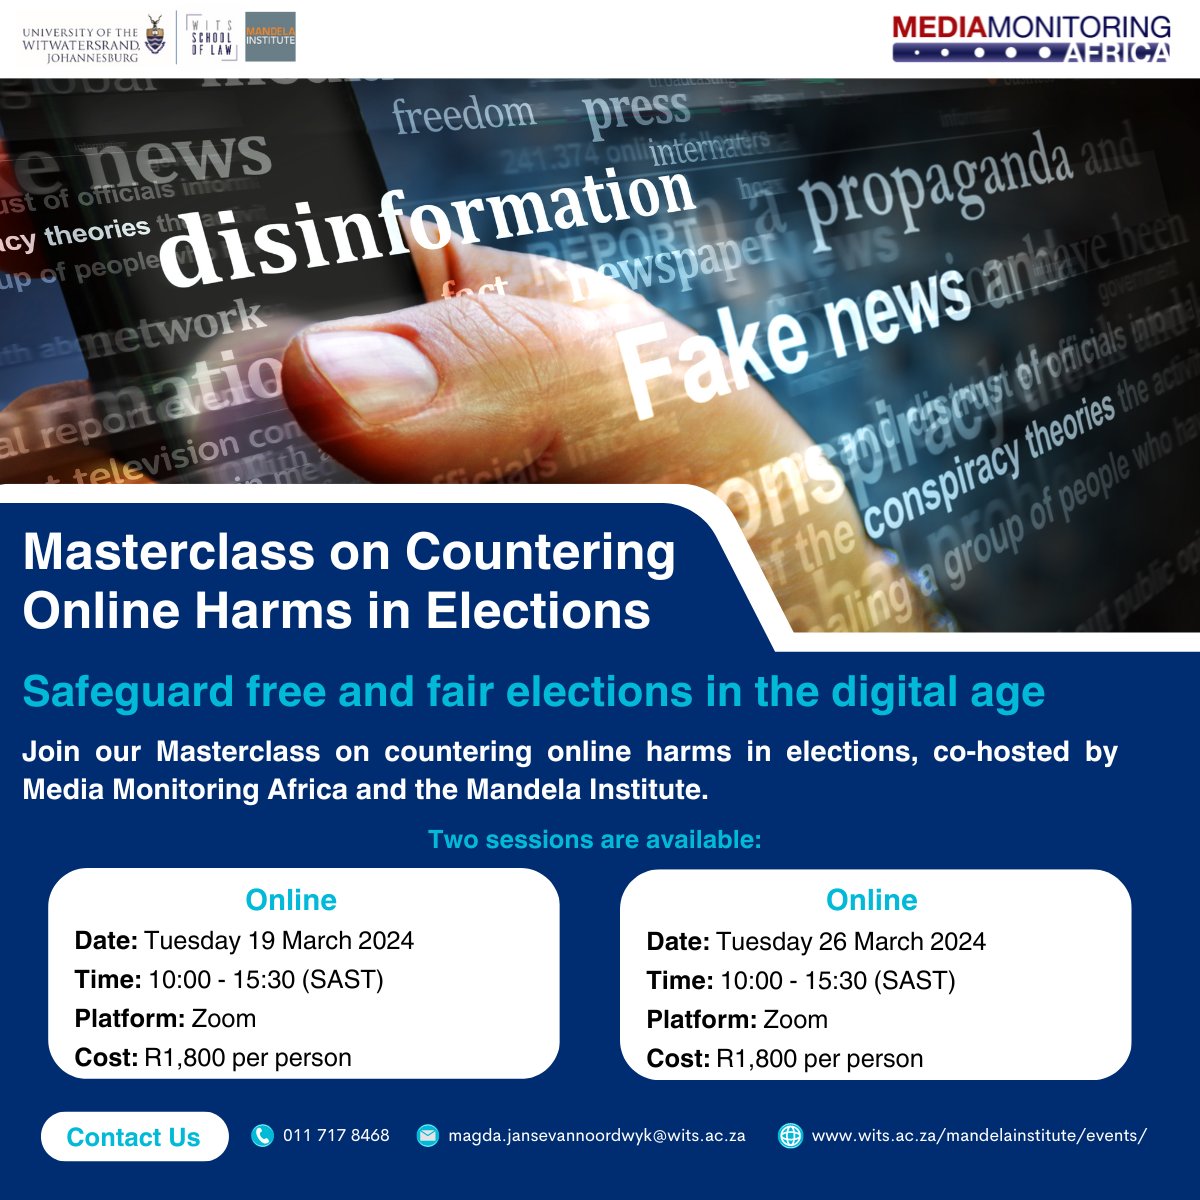 🛡️Safeguard free and fair elections in the digital age📱

Join our Masterclass on countering online harms in elections, co-hosted by @MediaMattersZA and the @MandelaInstWits .  Register here: forms.gle/y9gDRPu6nMszsn… Details here: wits.ac.za/mandelainstitu…

#onlineharms #elections